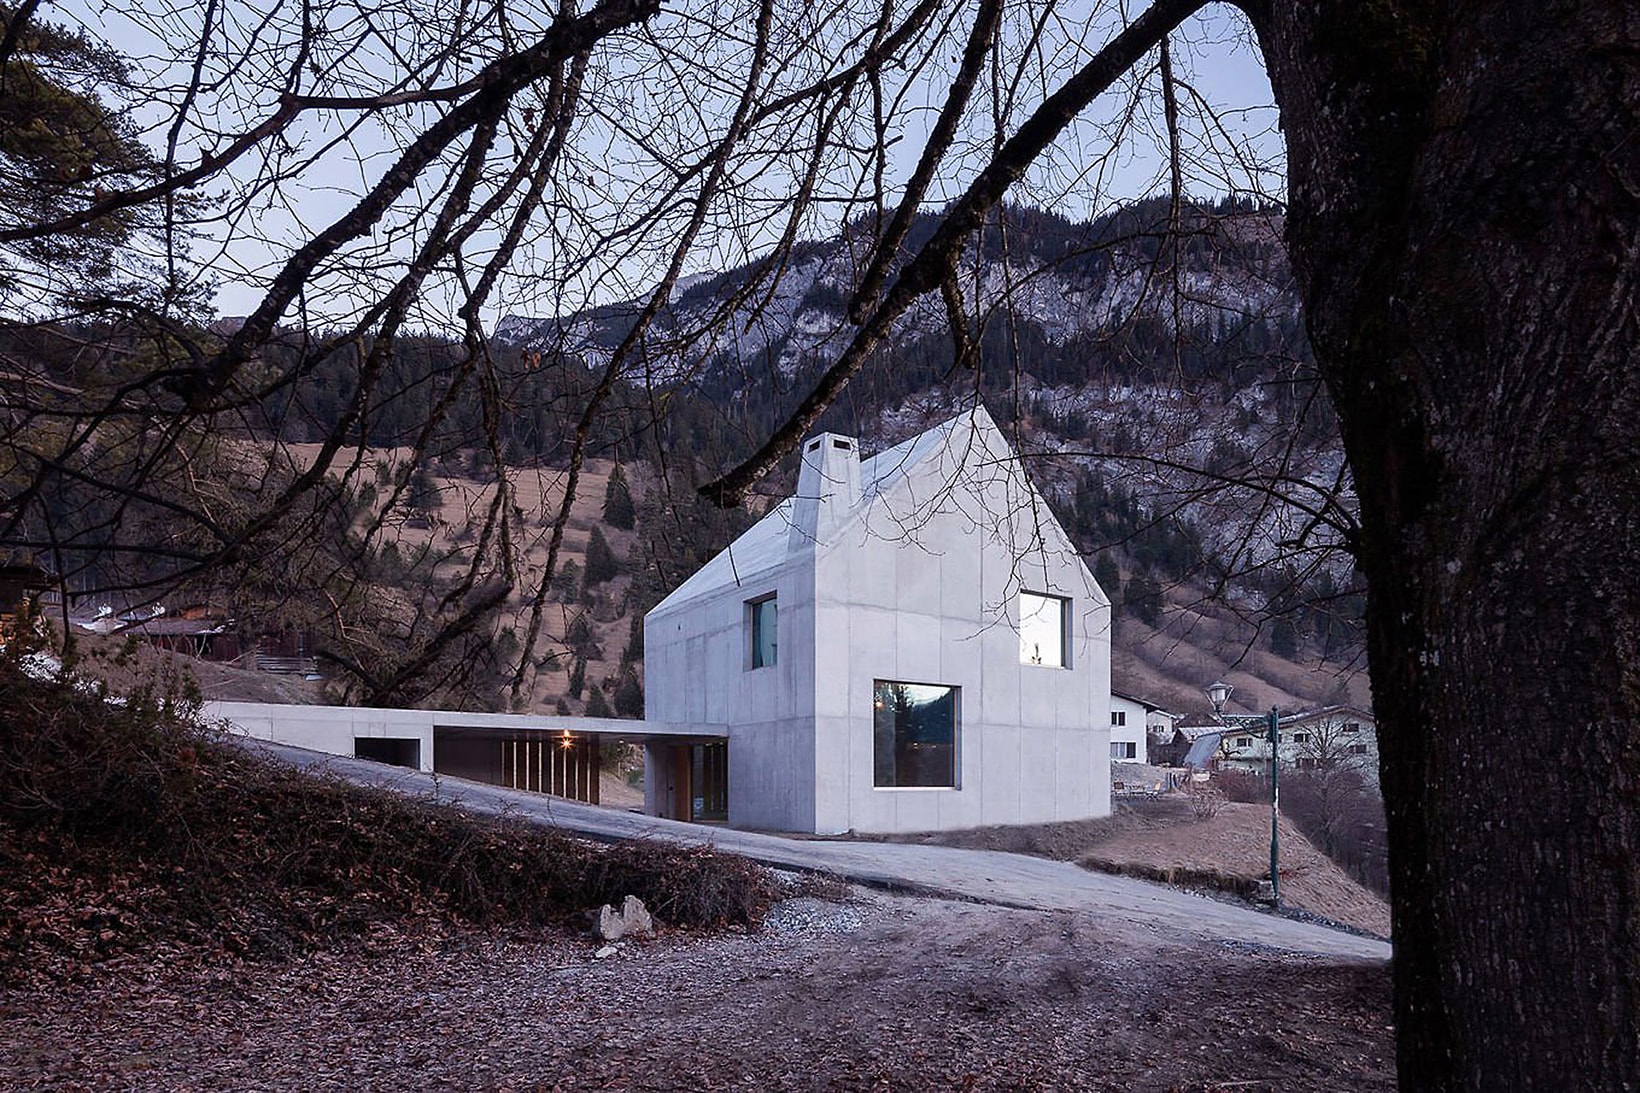 Trin Cabin Schneller Caminada Architects Switzerland homes houses home house mountains mountain wood concrete